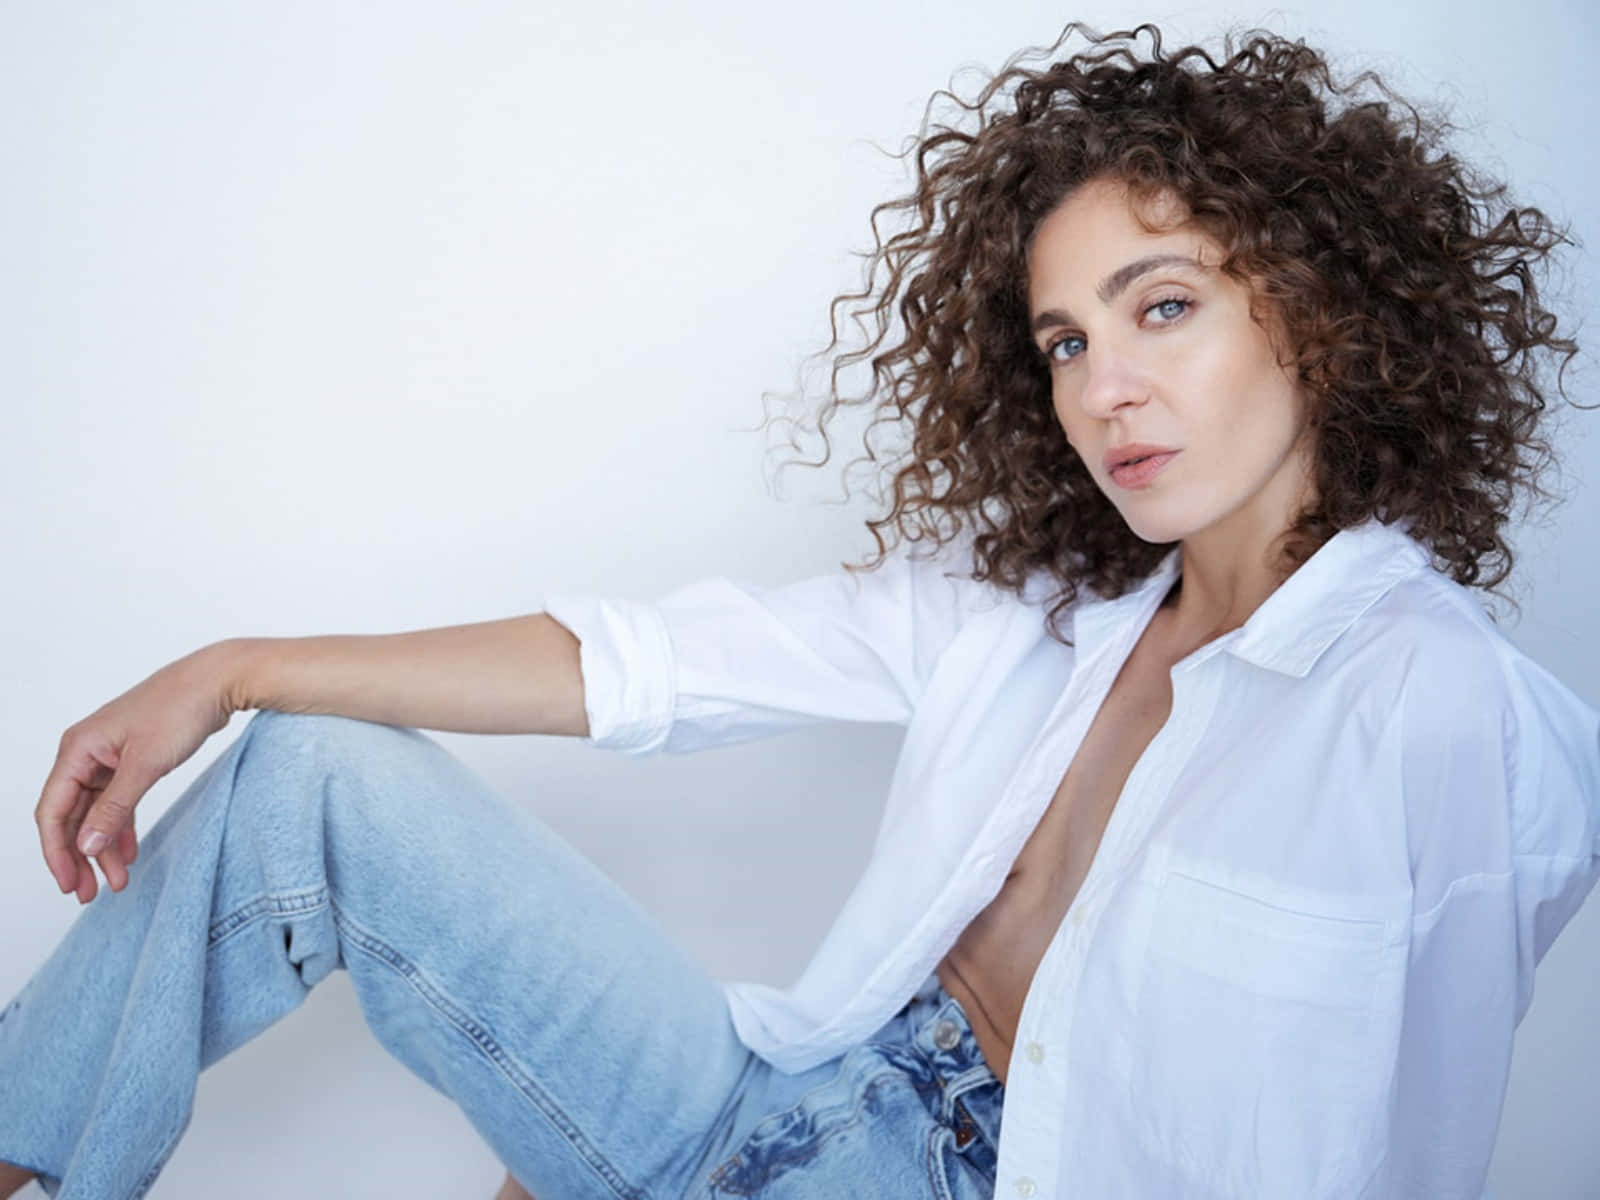 Curly Haired Woman In White Shirt And Jeans Wallpaper